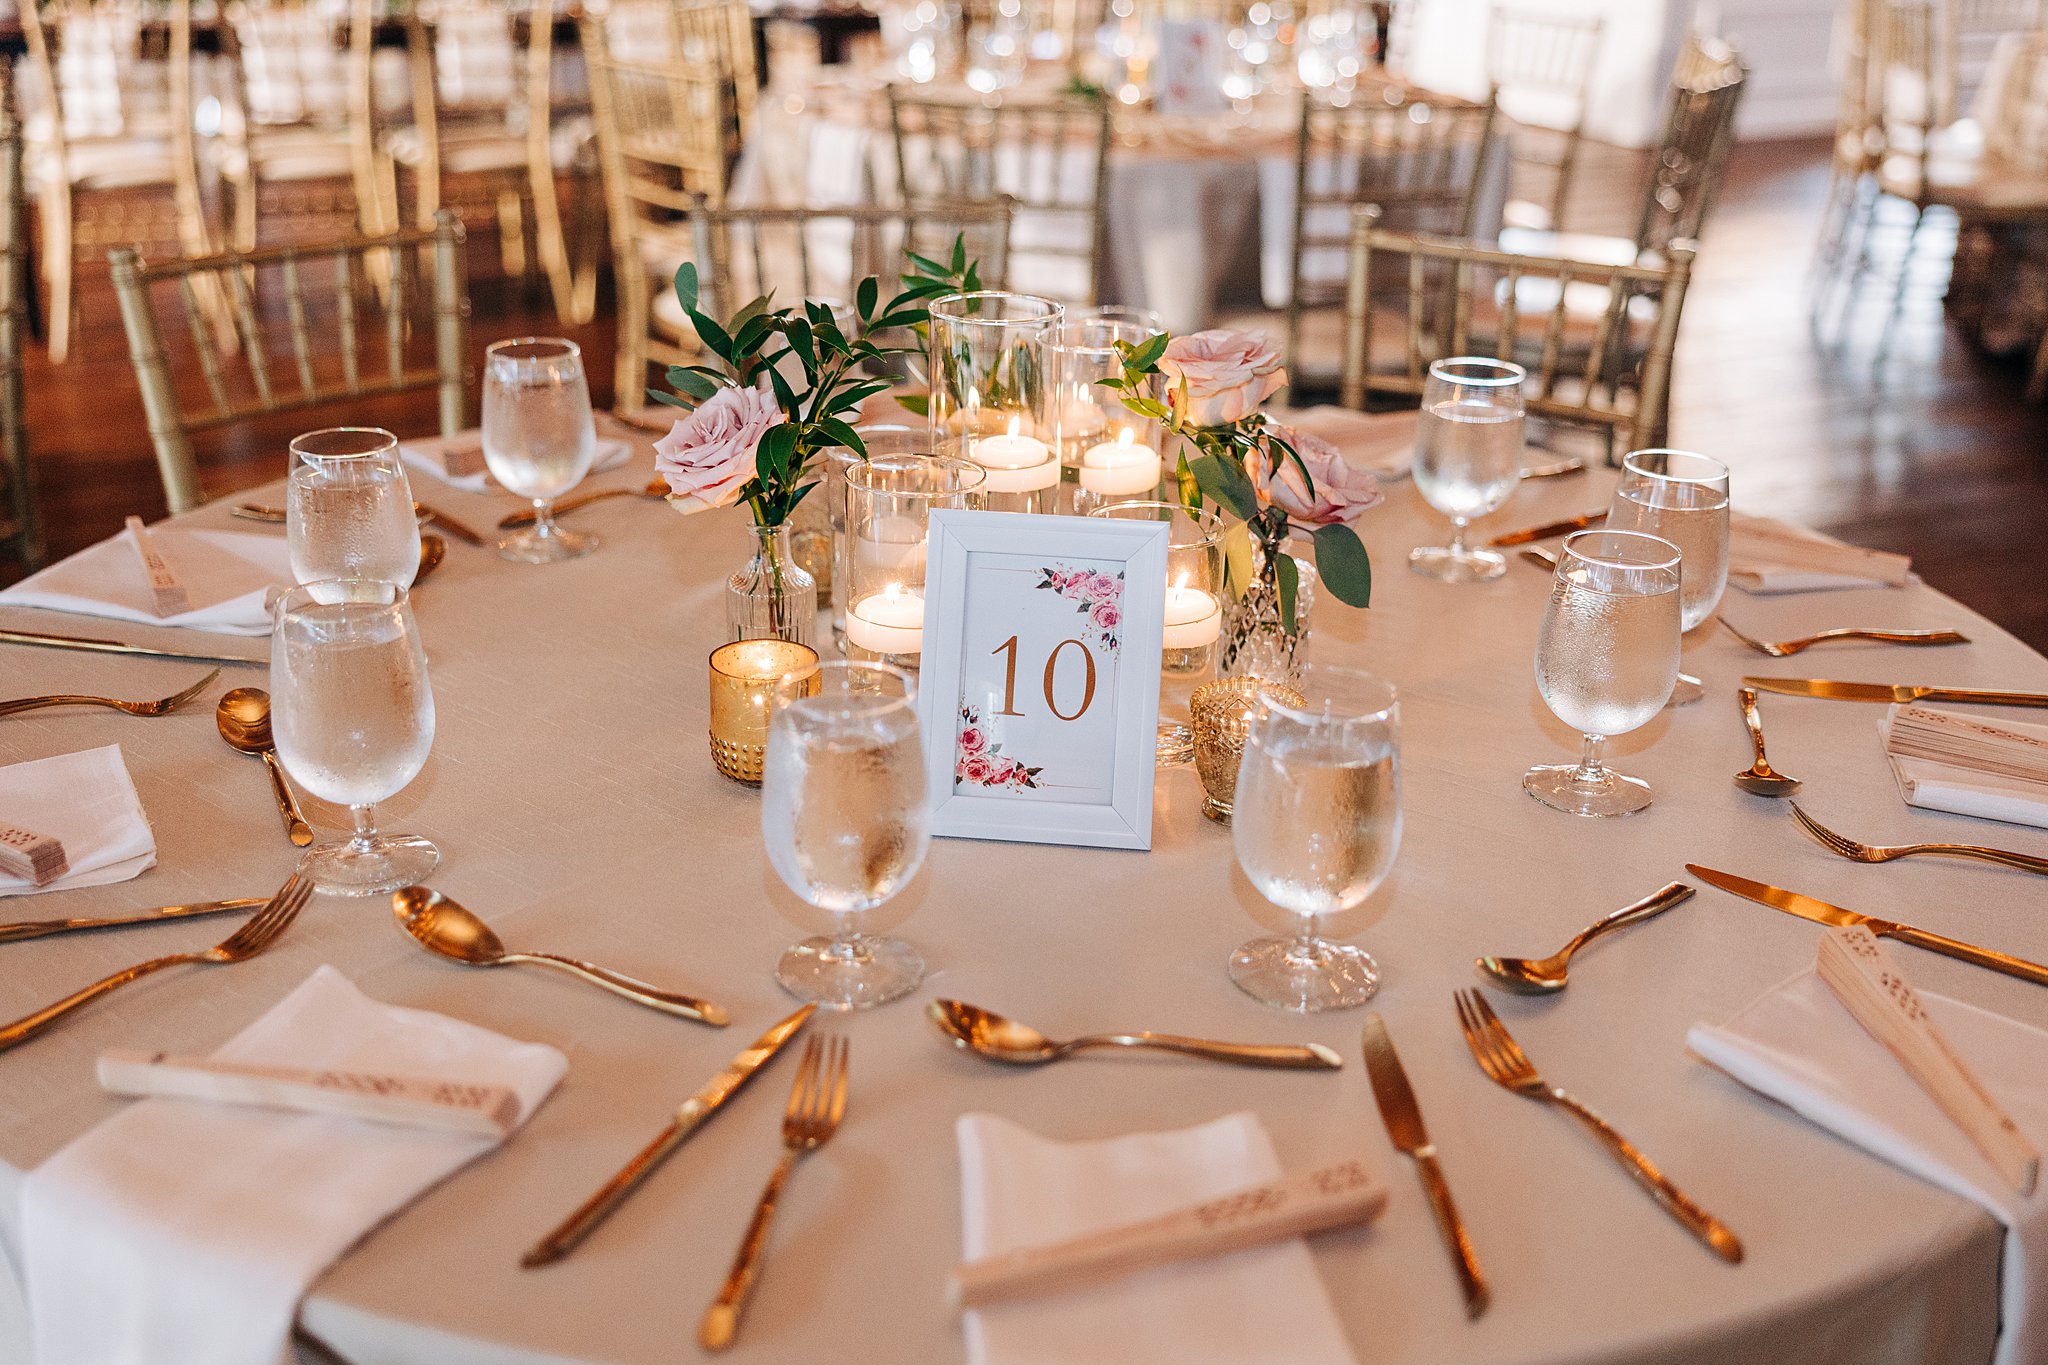 Details of a wedding reception table setting with gold silverware and candles